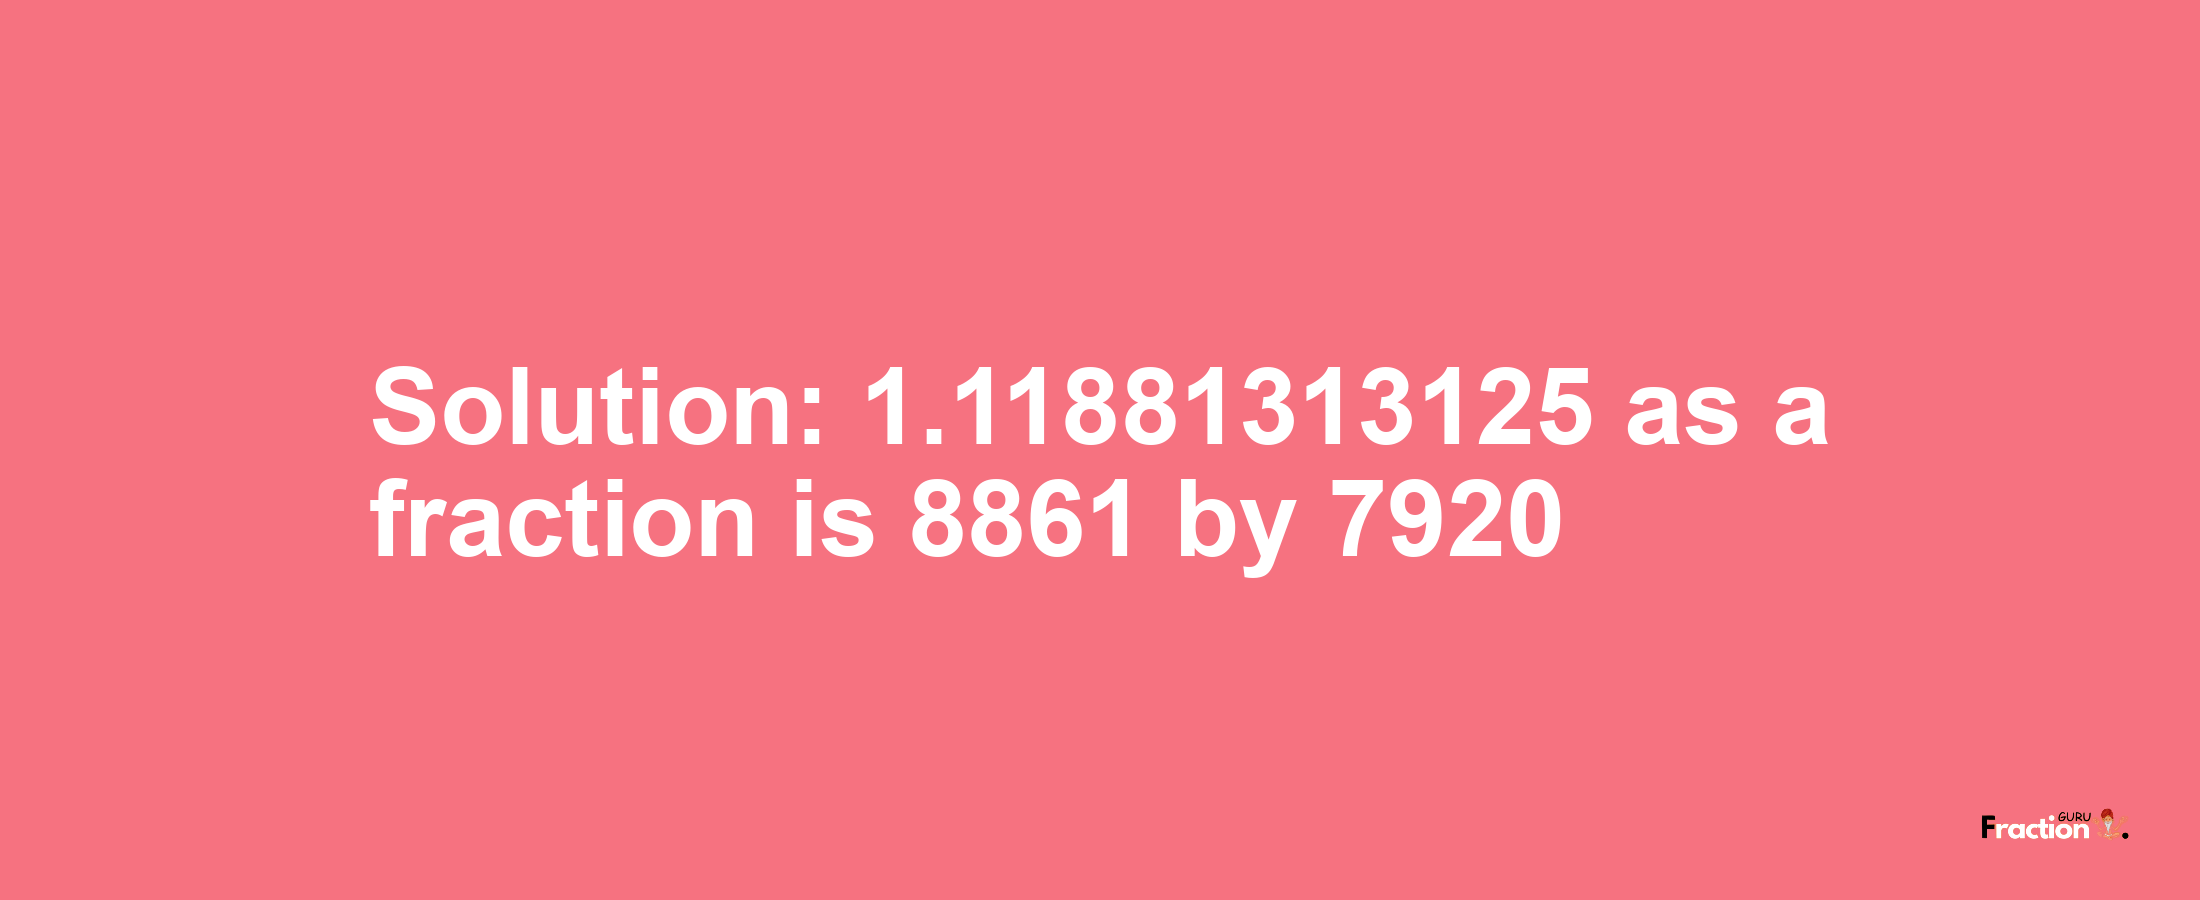 Solution:1.11881313125 as a fraction is 8861/7920